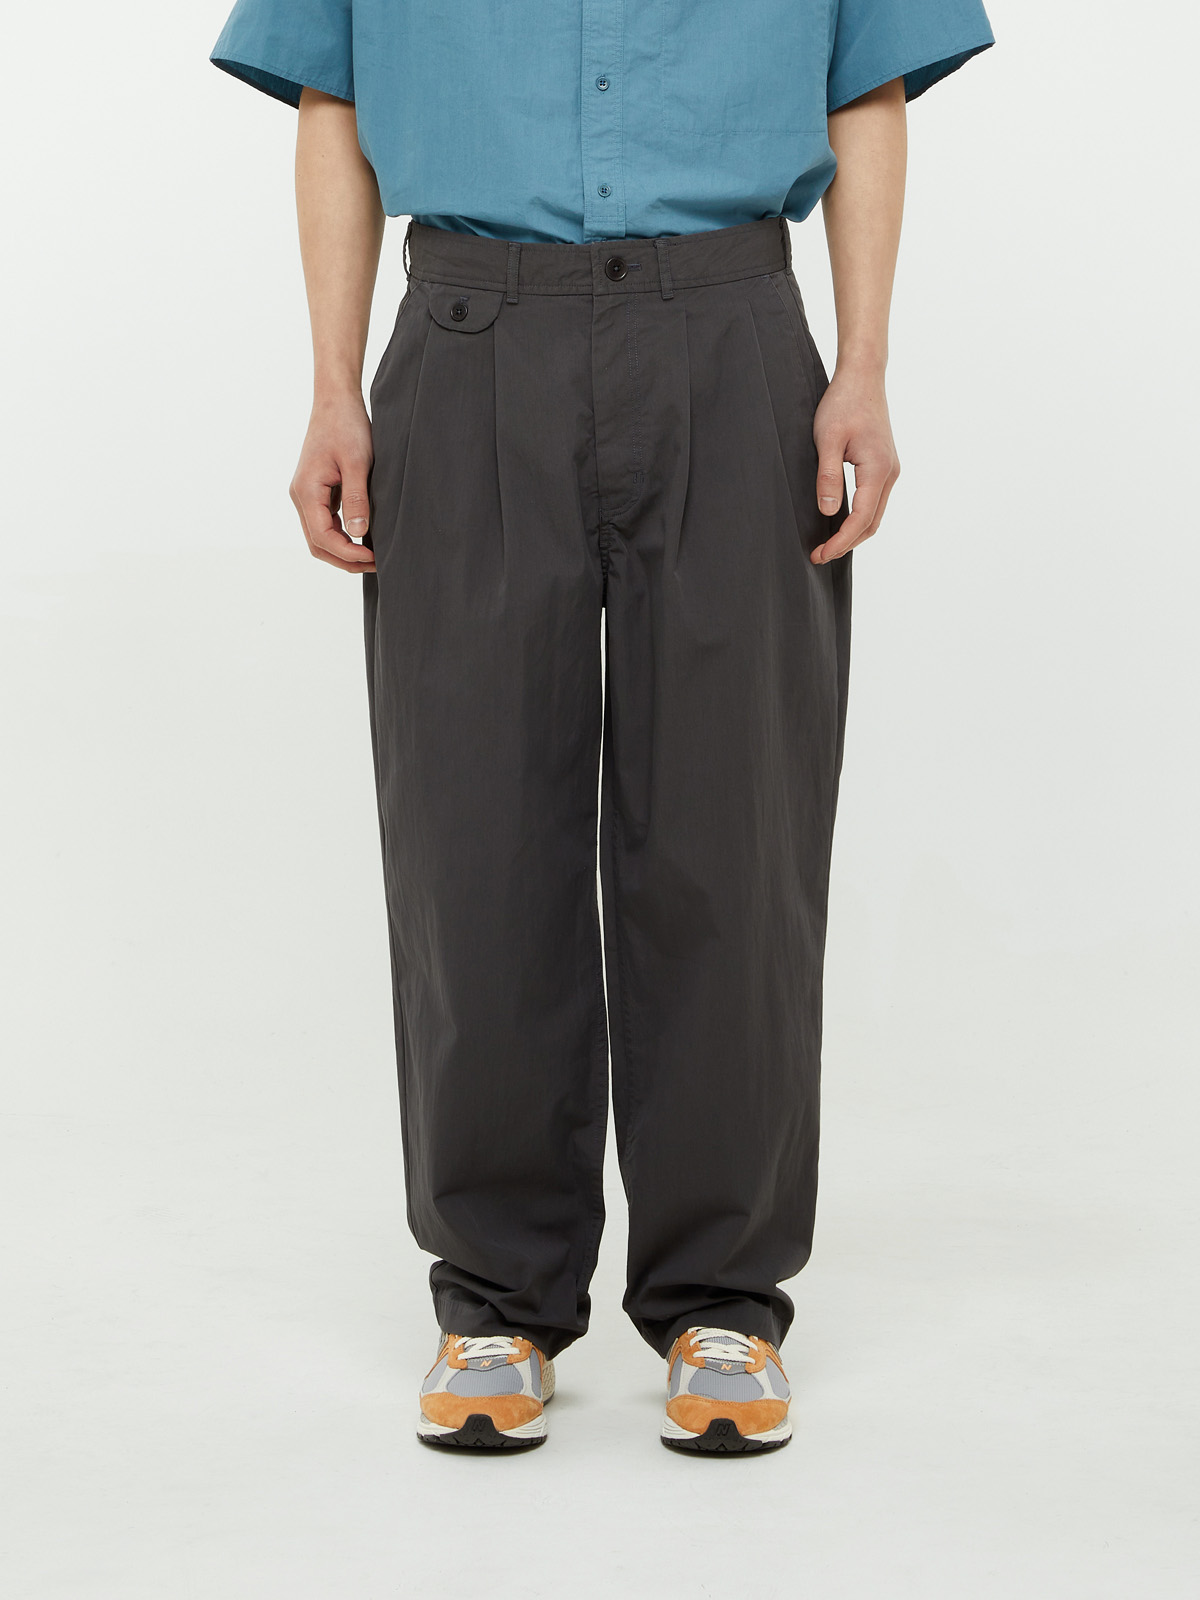 LOOSE TAPERED ALLEN PANTS (CHARCOAL)